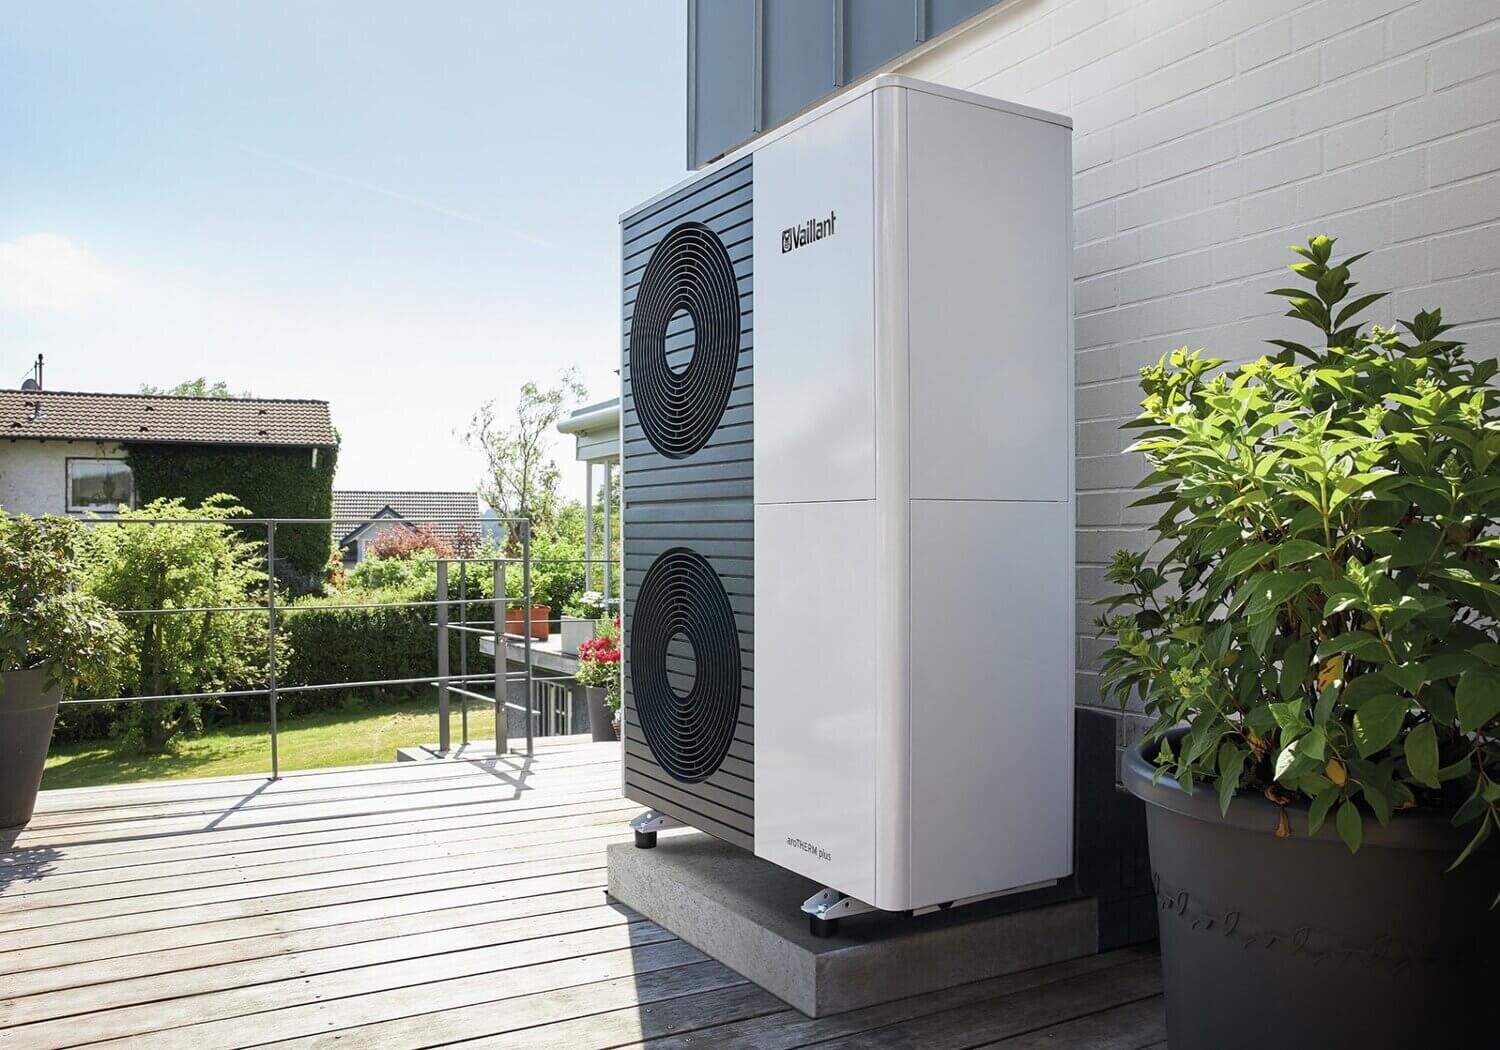 The argument for air source heat pumps over ground source heat pumps. (Image: Green Square)